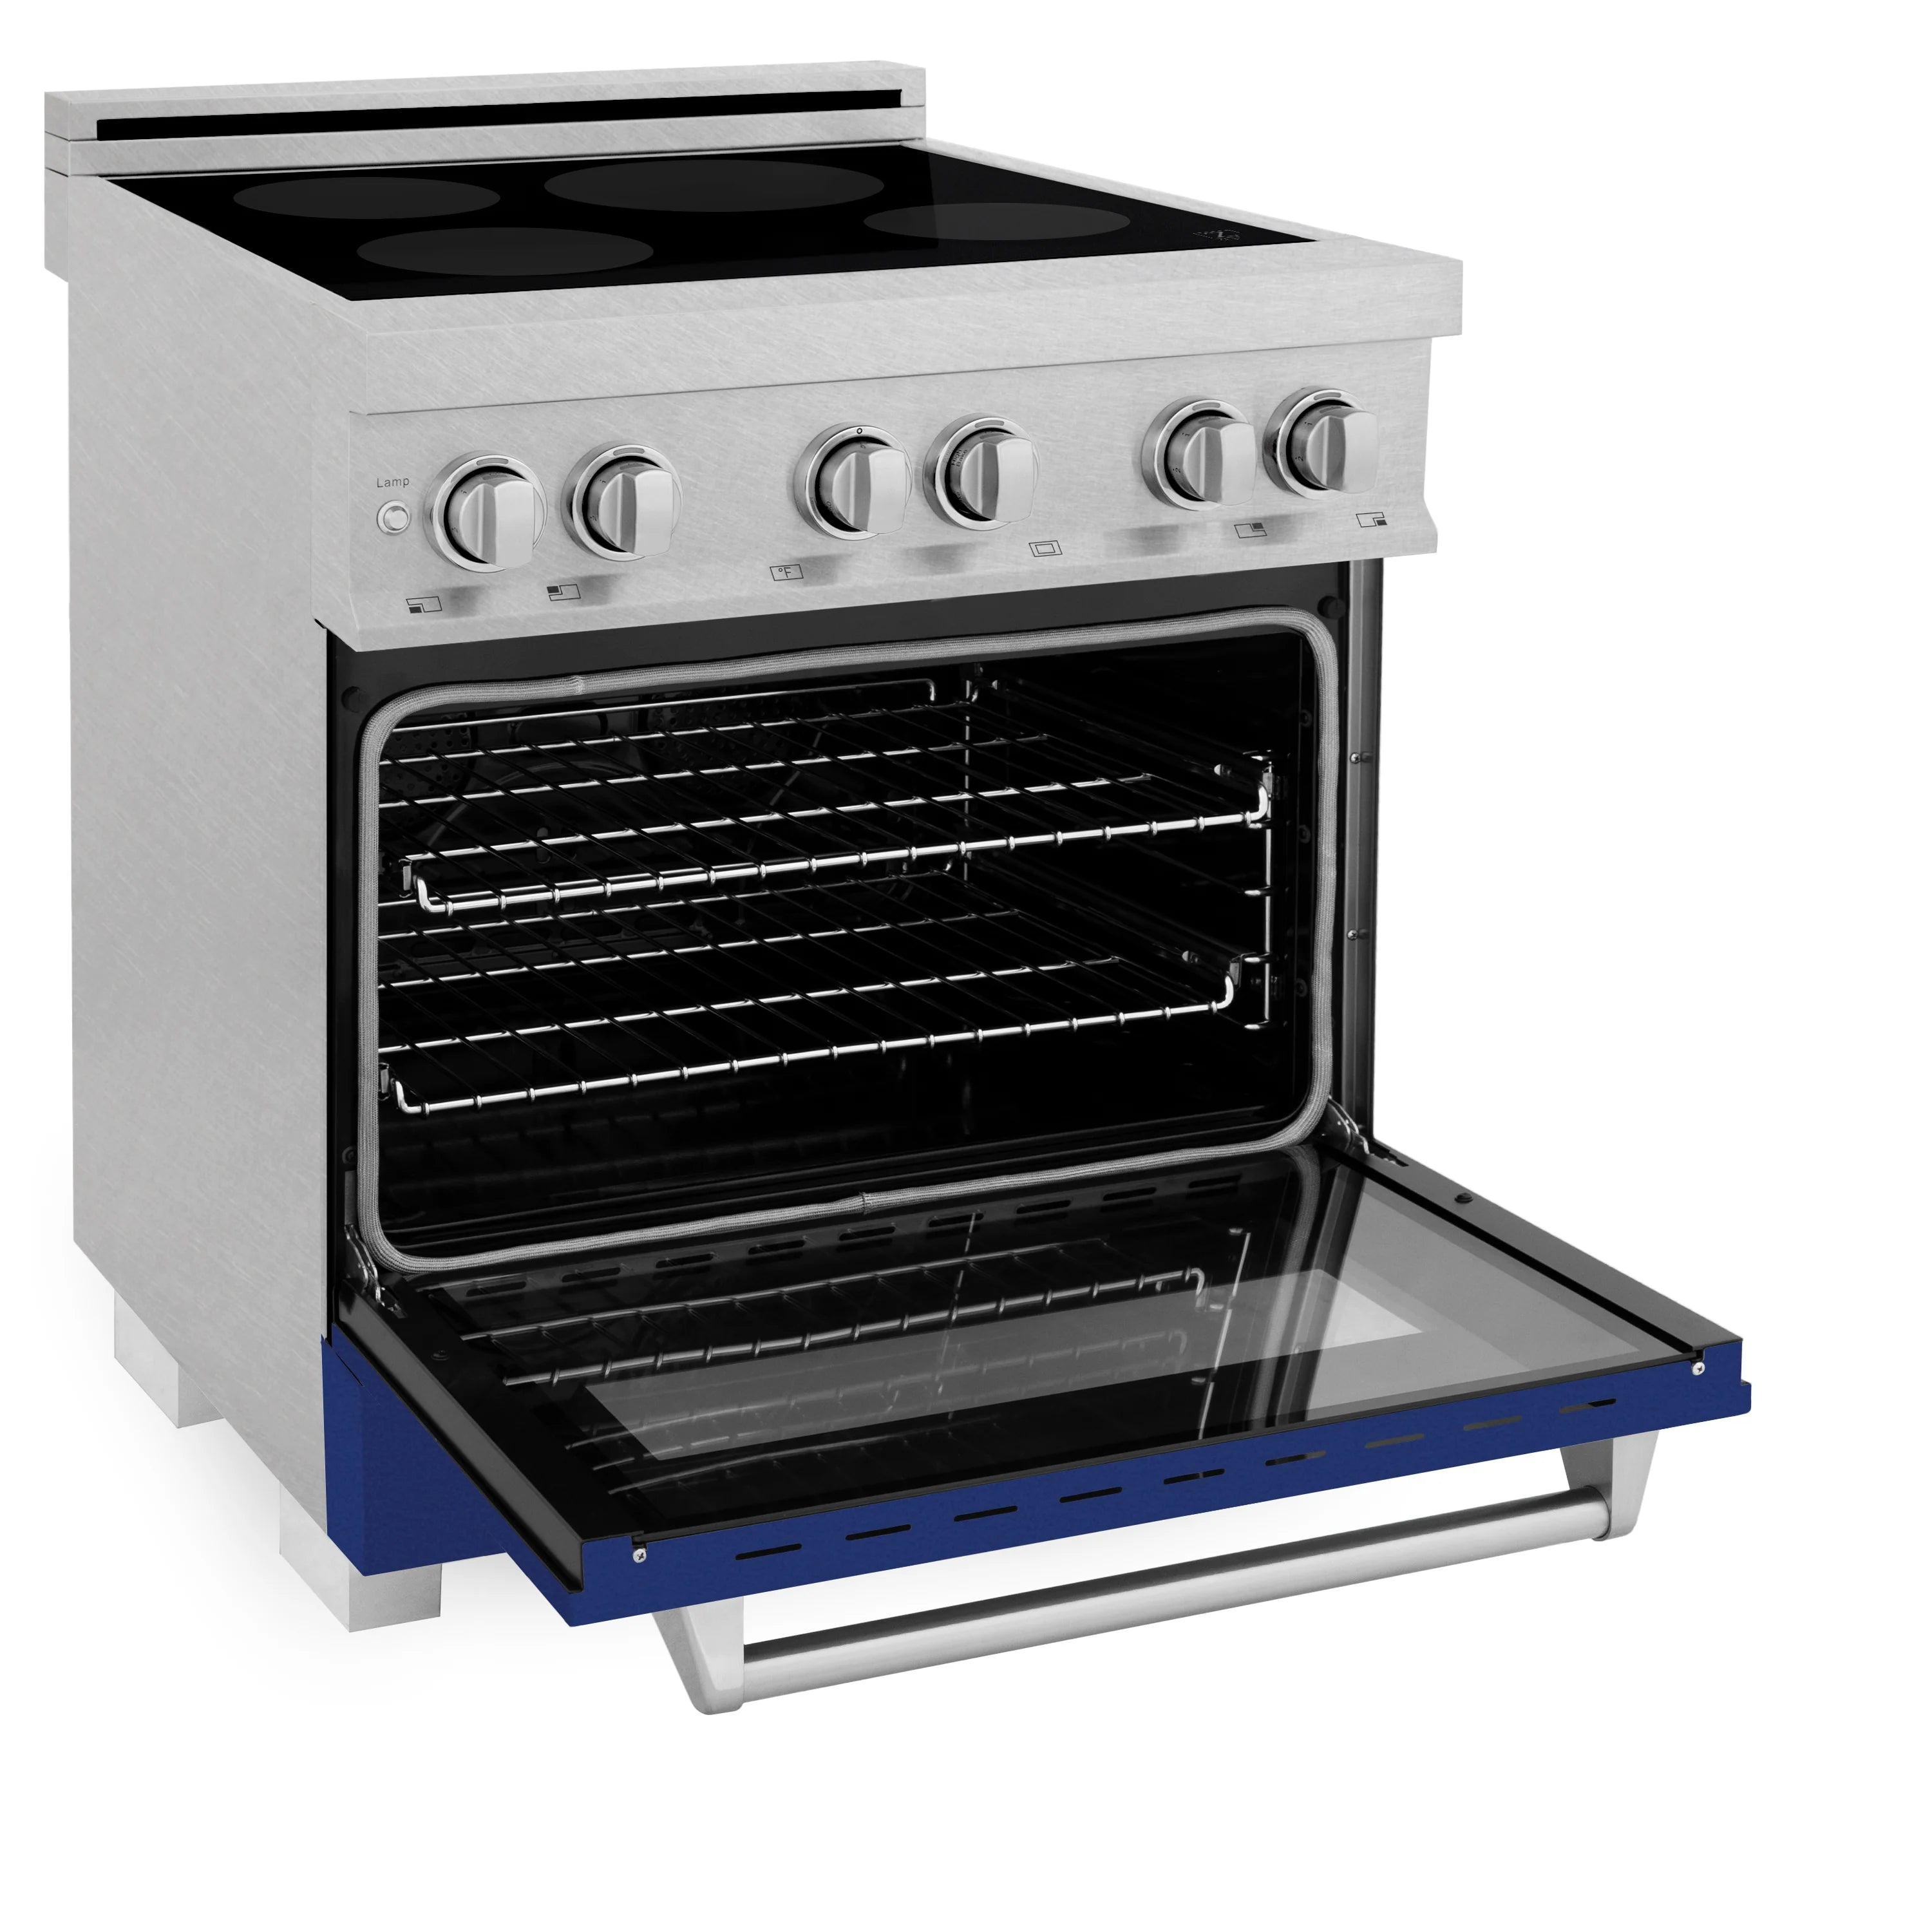 ZLINE 30" 4.0 cu. ft. Induction Range with a 4 Element Stove and Electric Oven (RAINDS-BG-30)